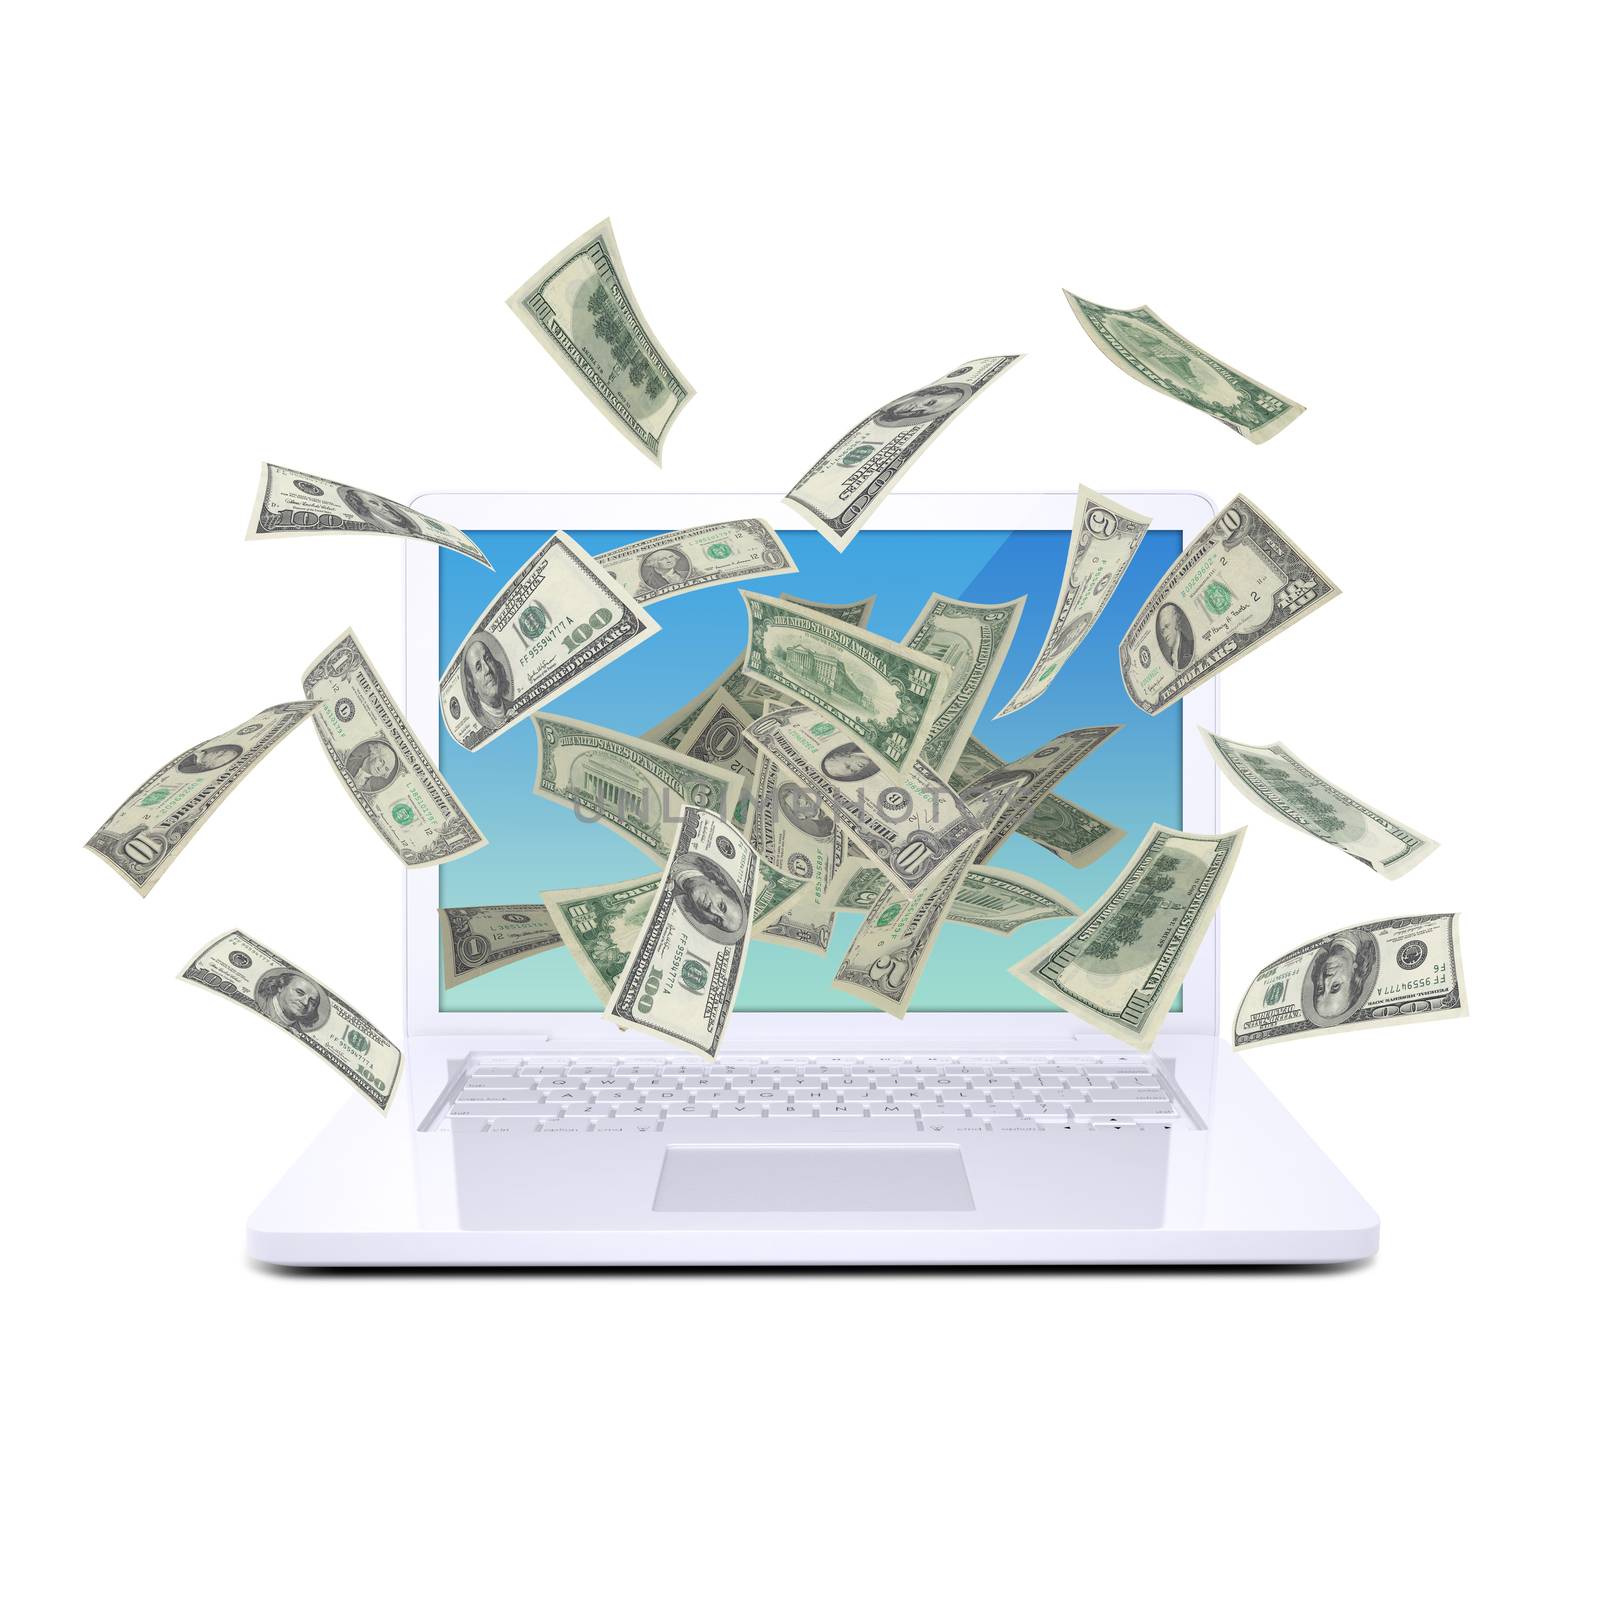 Dollar notes flying around the laptop by cherezoff